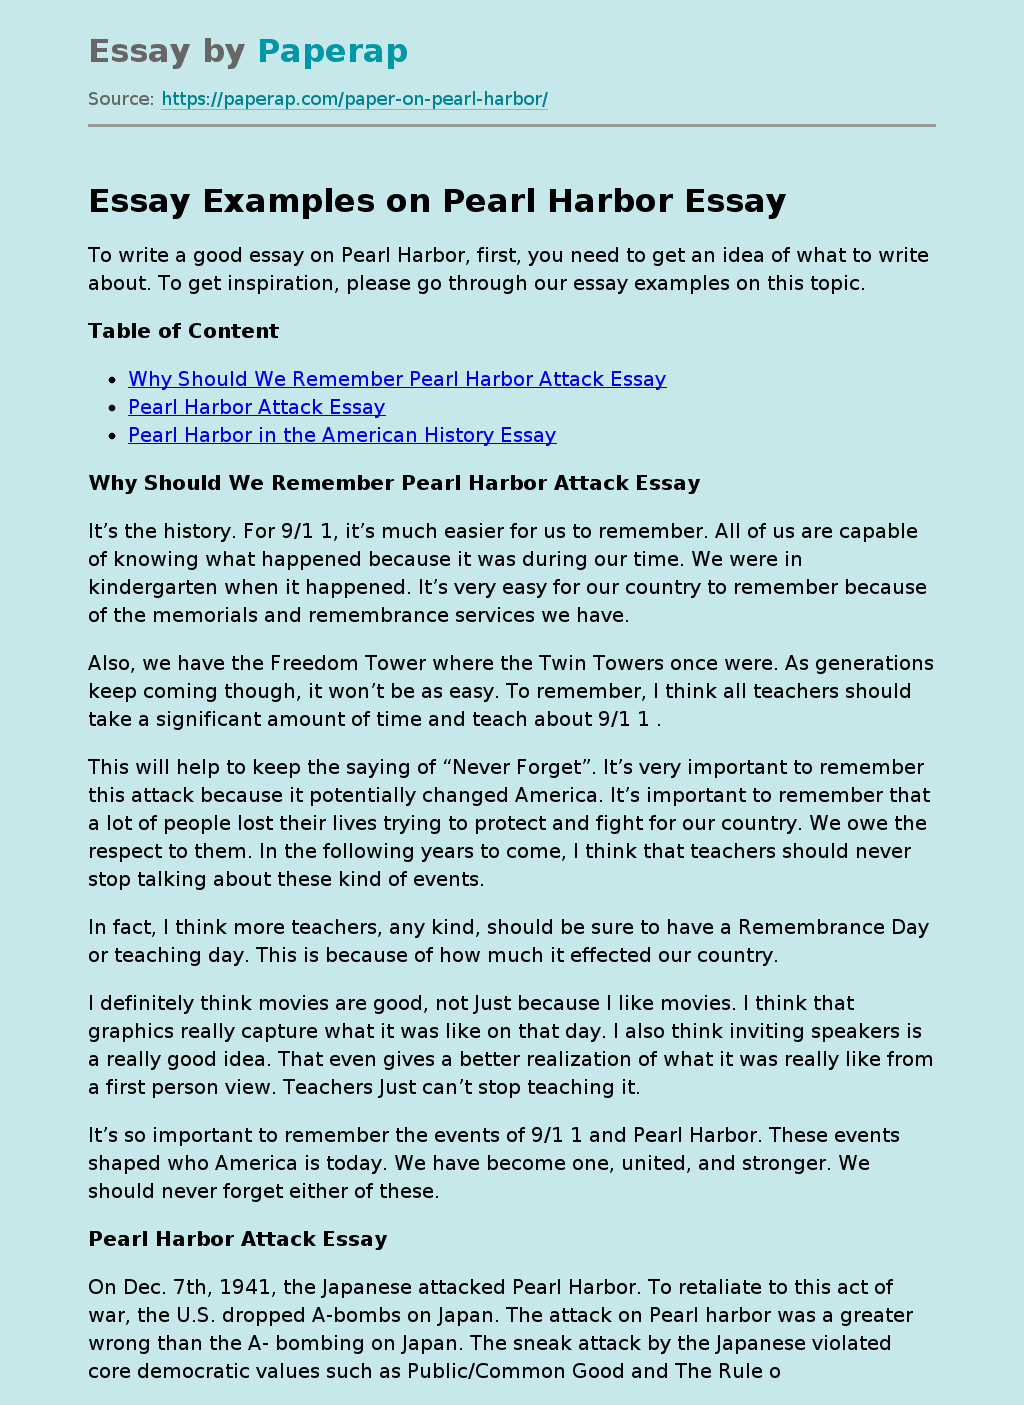 Essay Examples on Pearl Harbor